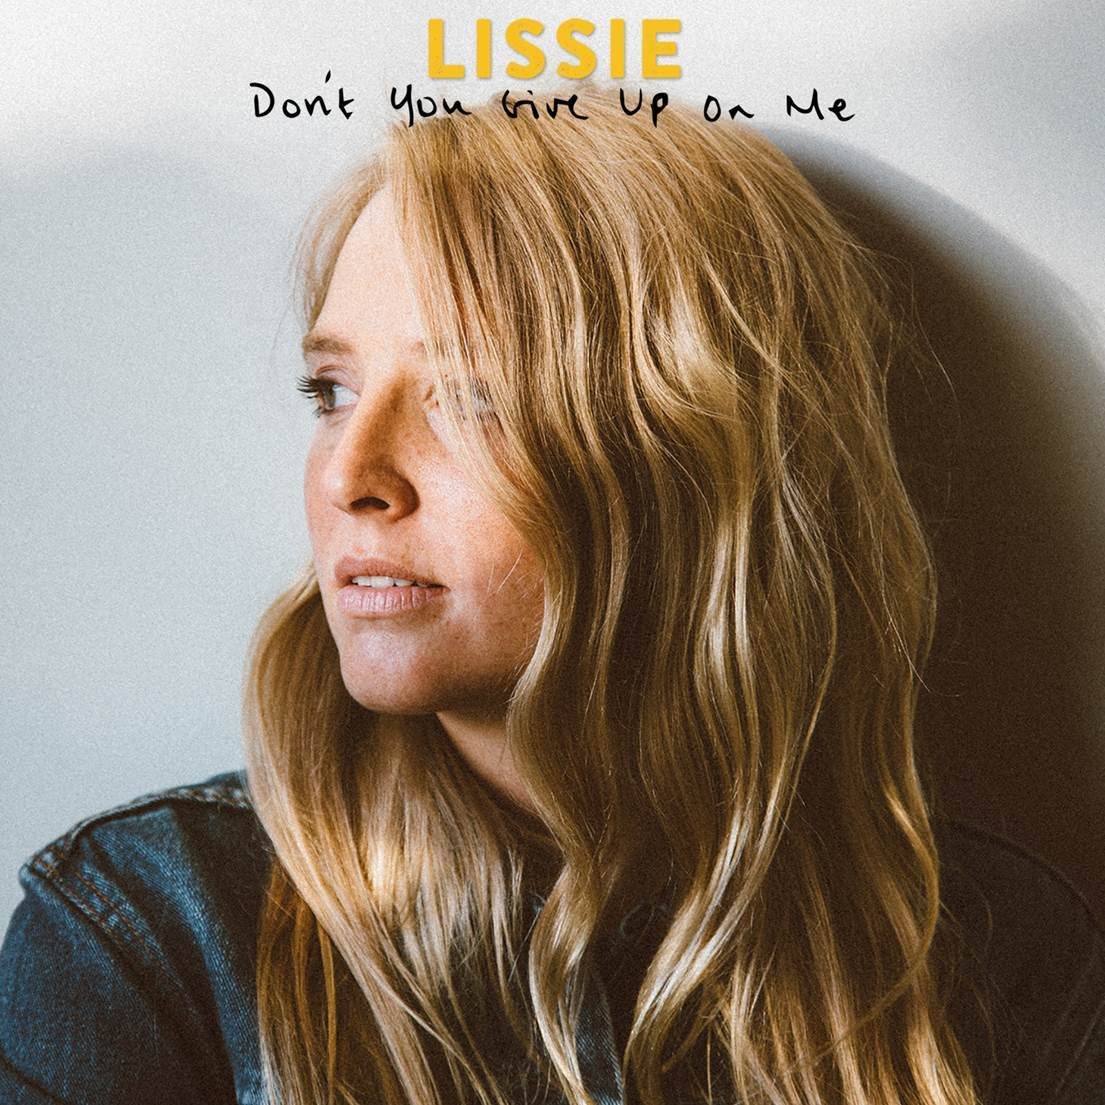 Lissie releases "Don’t You Give Up On Me" video, her LP My Wild West comes out February 12th via Cooking Vinyl.